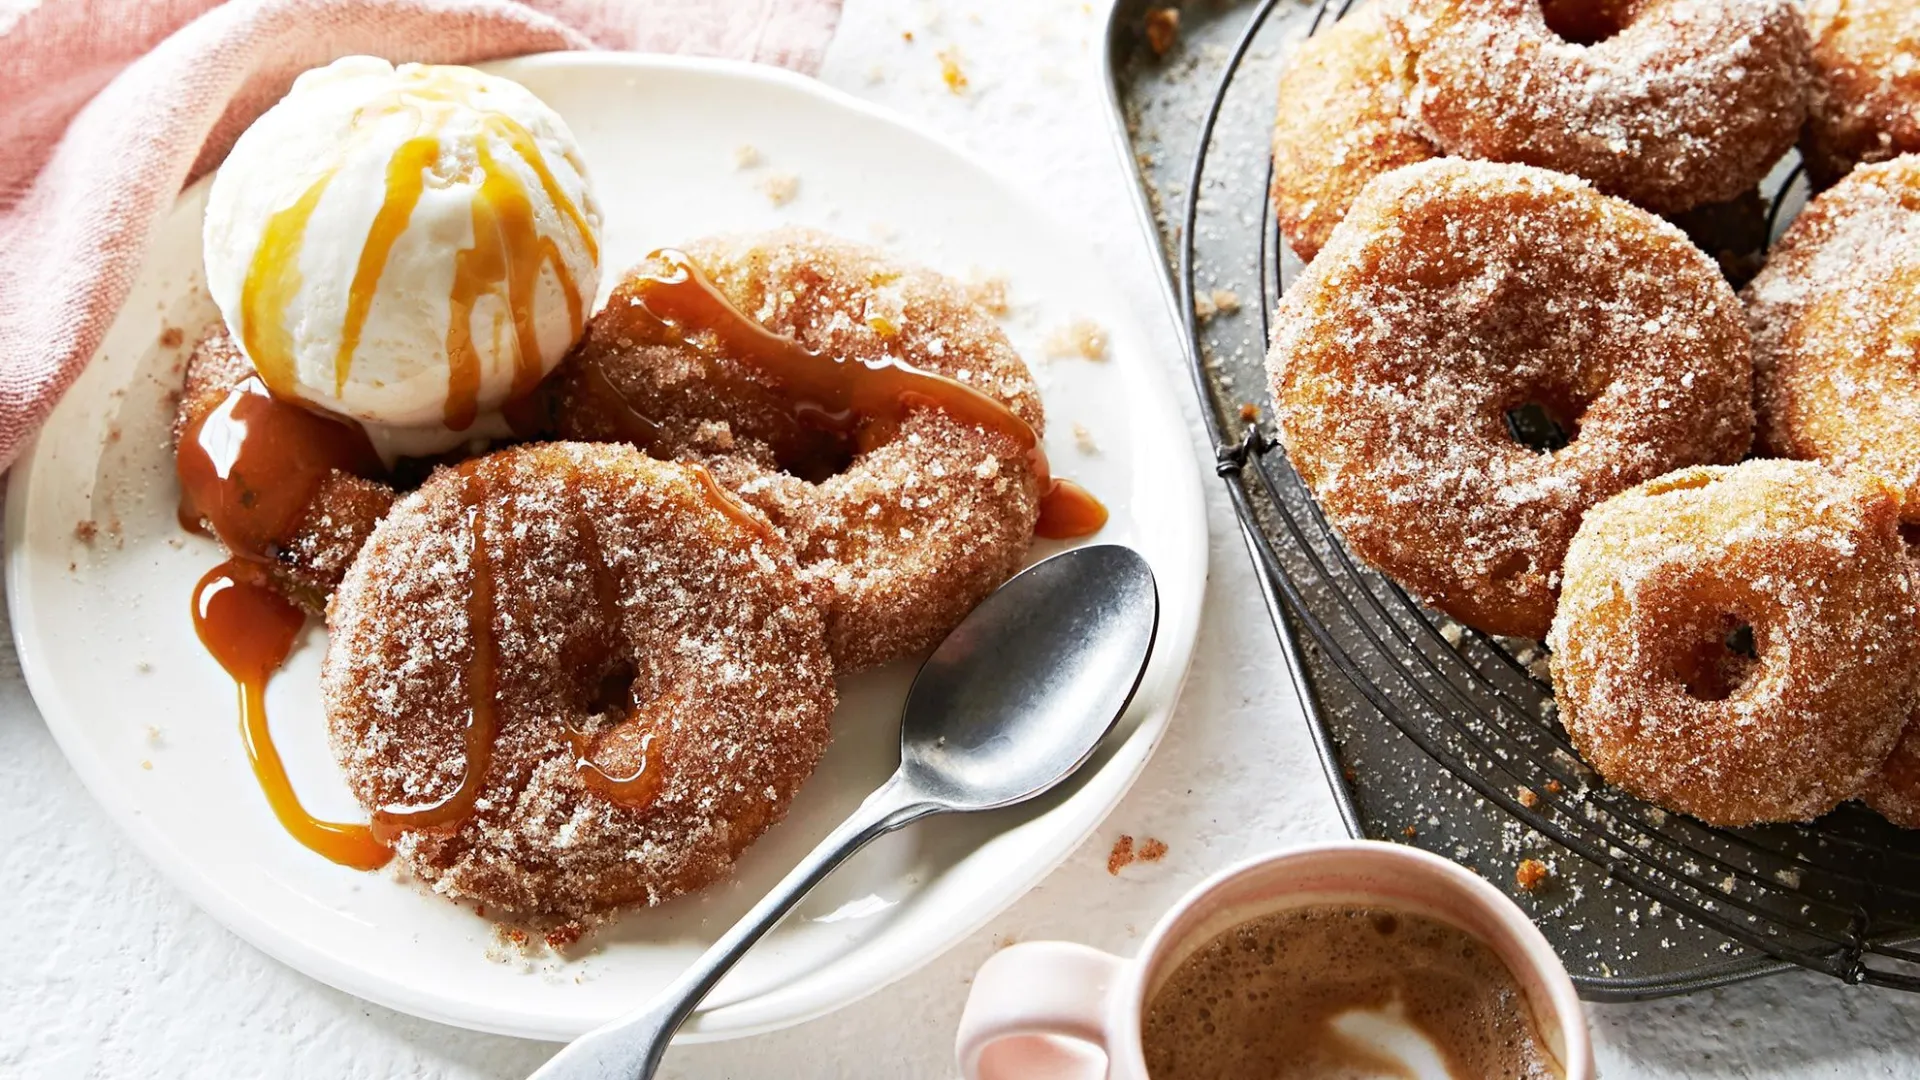 Apple fritters with ginger beer batter